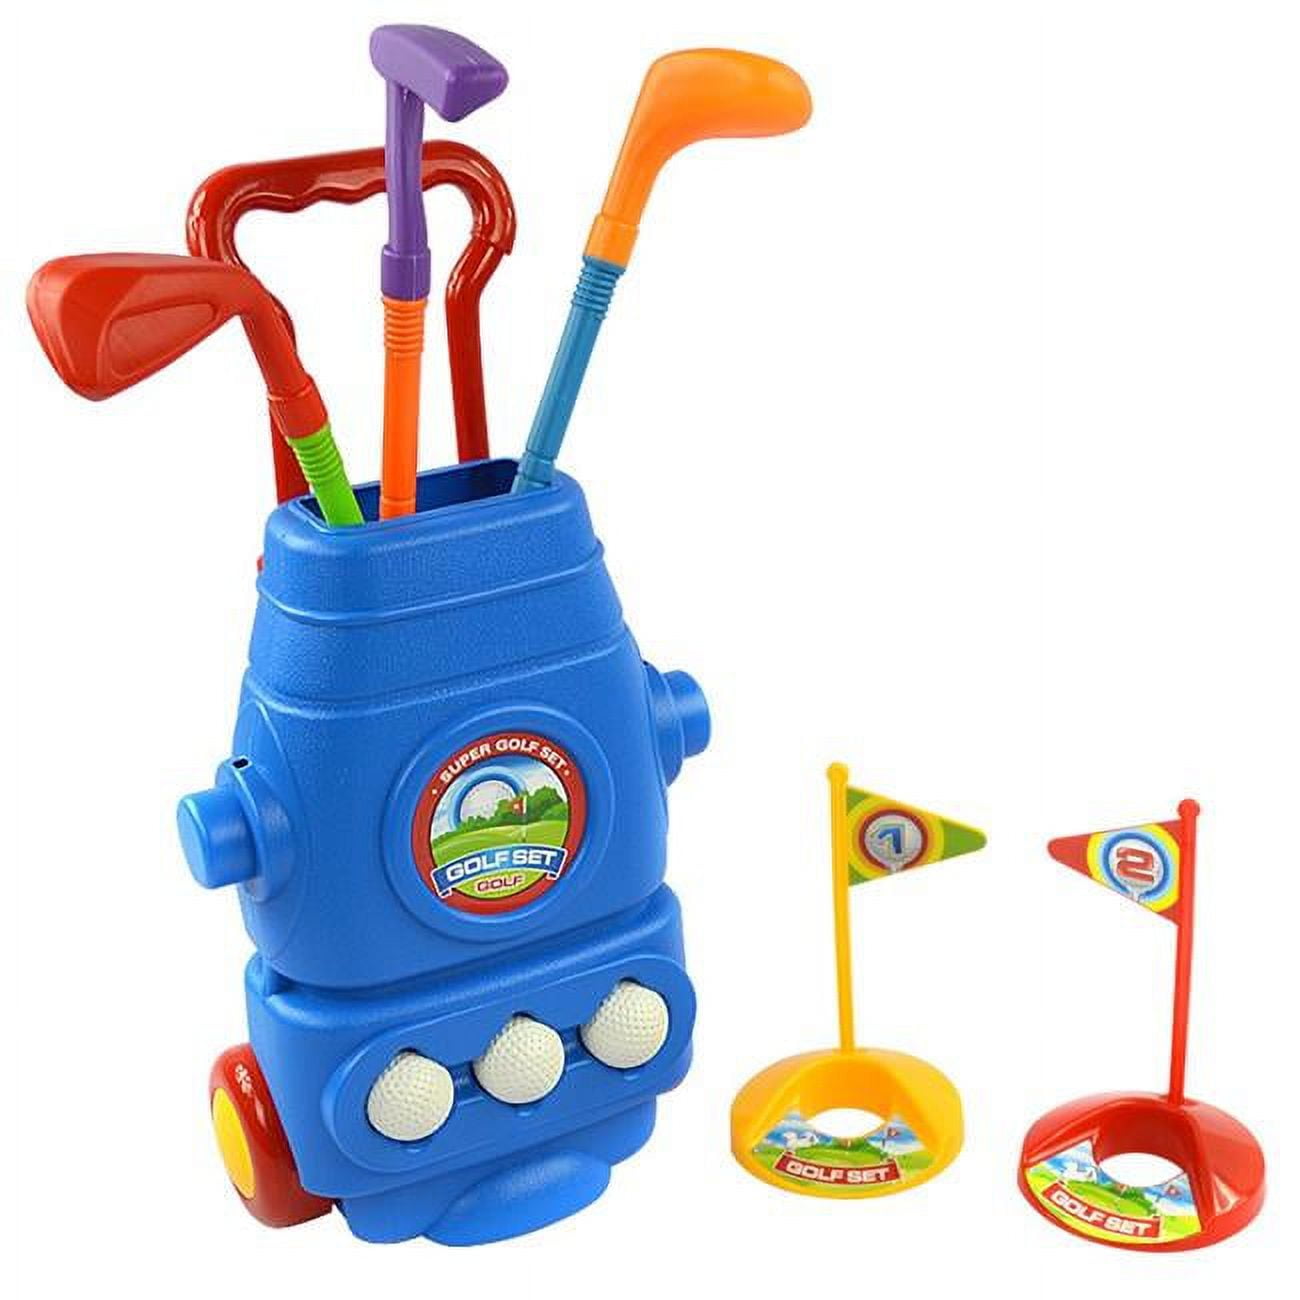 Ps9881 Deluxe Golf Set For Kids Comes With 3 Golf Clubs, 3 Balls & 2 Practice Holes